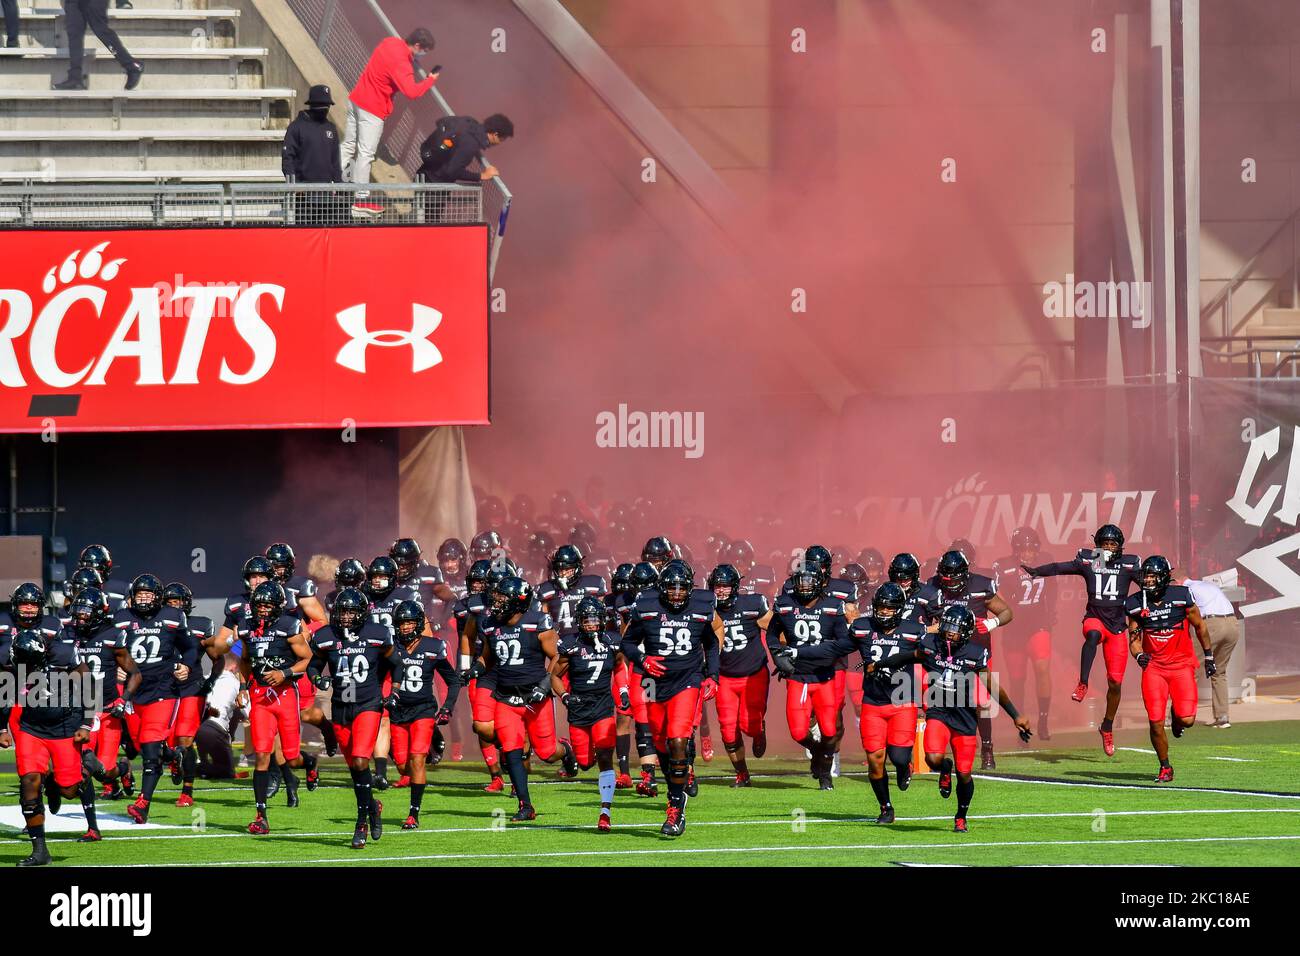 University of Cincinnati players take to the the field prior to the start of the NCAA college football game at Nippert Stadium between the University of Cincinnati Bearcats and the University of South Florida. Cincinnati defeated USF 28-7. Saturday, October 3rd, 2020, in Cincinnati, Ohio, United States. (Photo by Jason Whitman/NurPhoto) Stock Photo